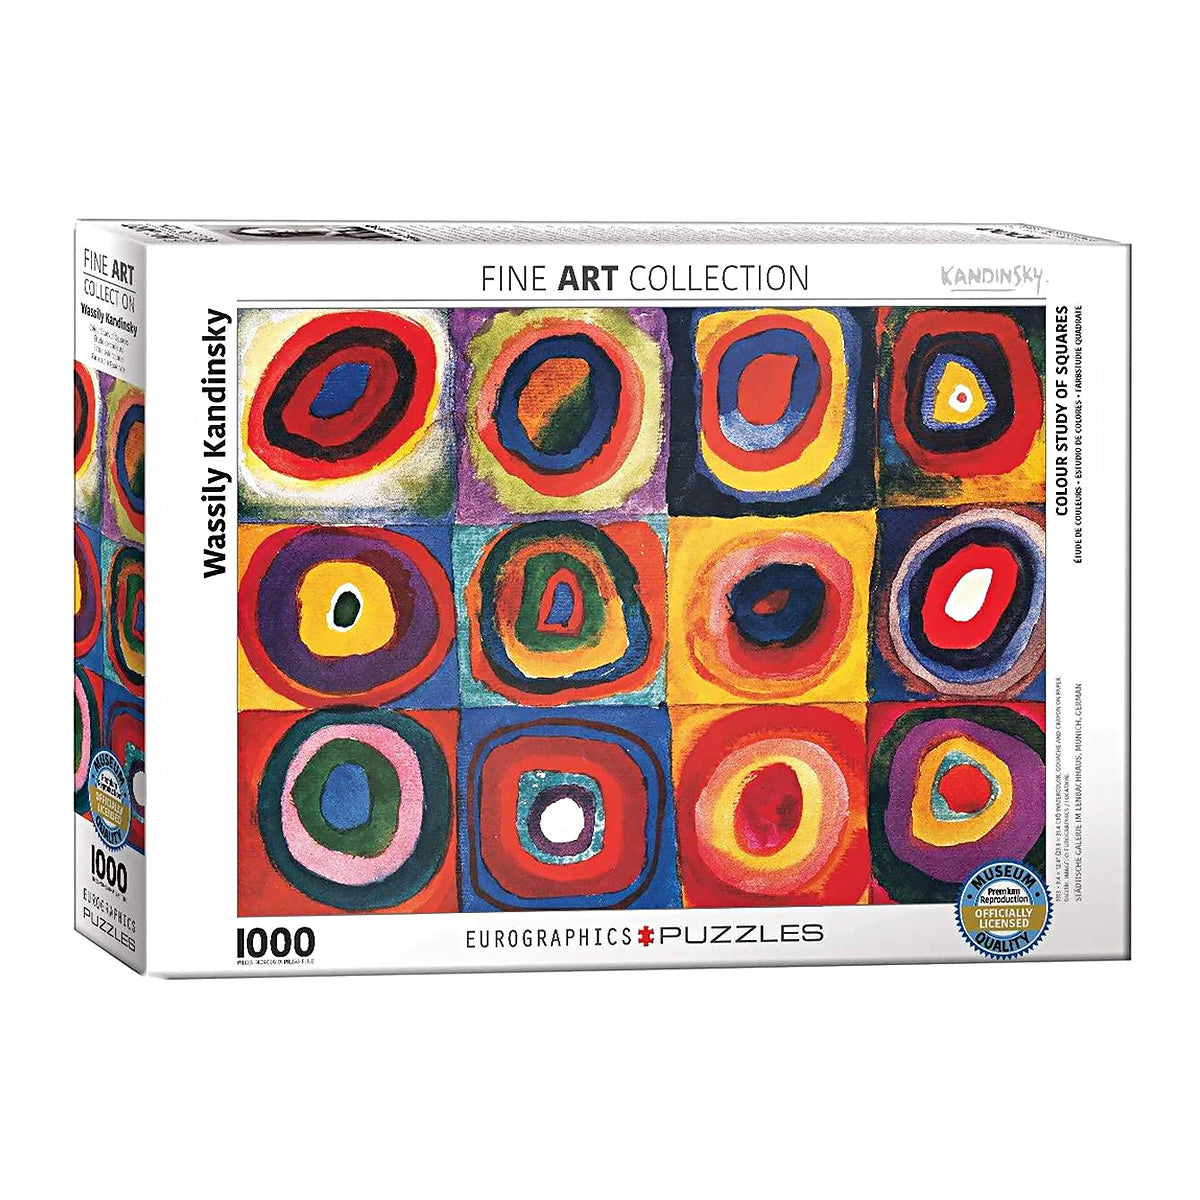 The iconic Wassily Kandinsky Colour Study jigsaw puzzle from Eurographics for art enthusiasts